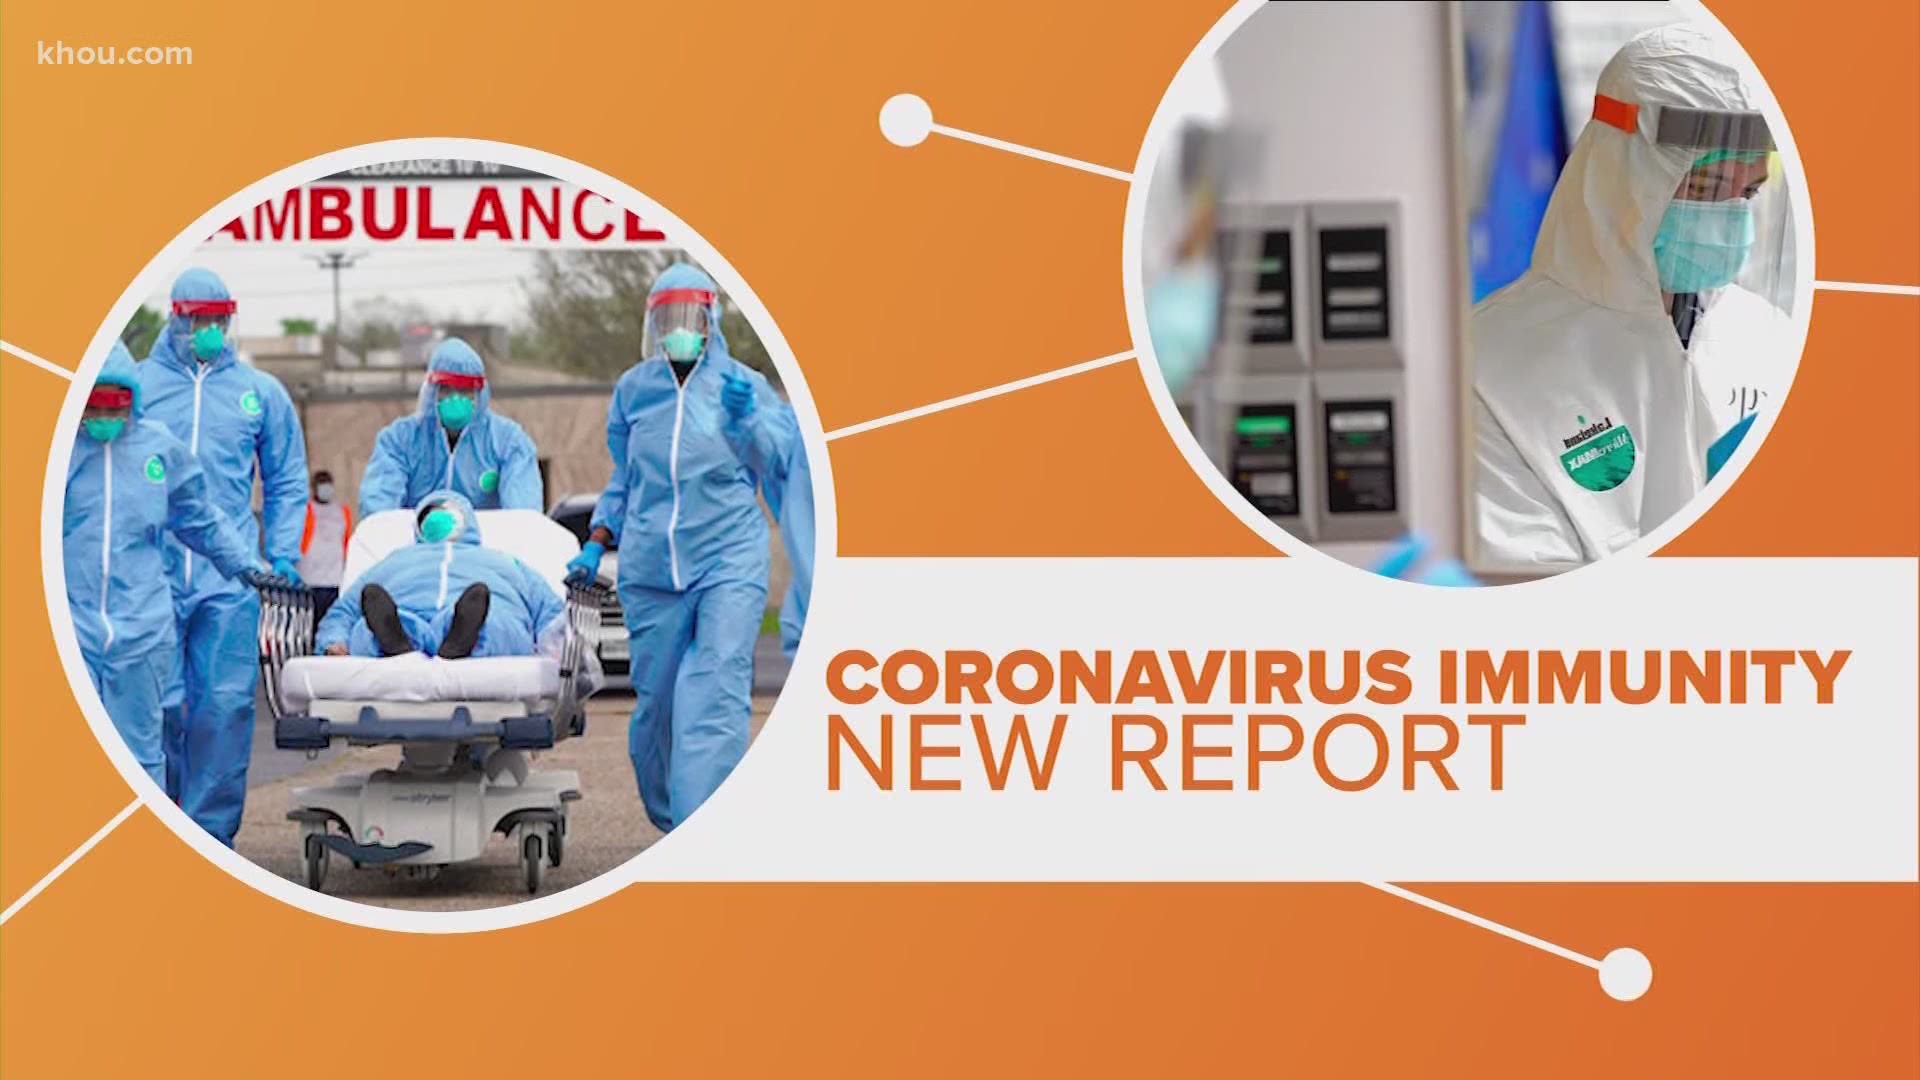 Since the coronavirus pandemic started there have been a lot of questions about immunity. Now, a new report has some very welcome good news.